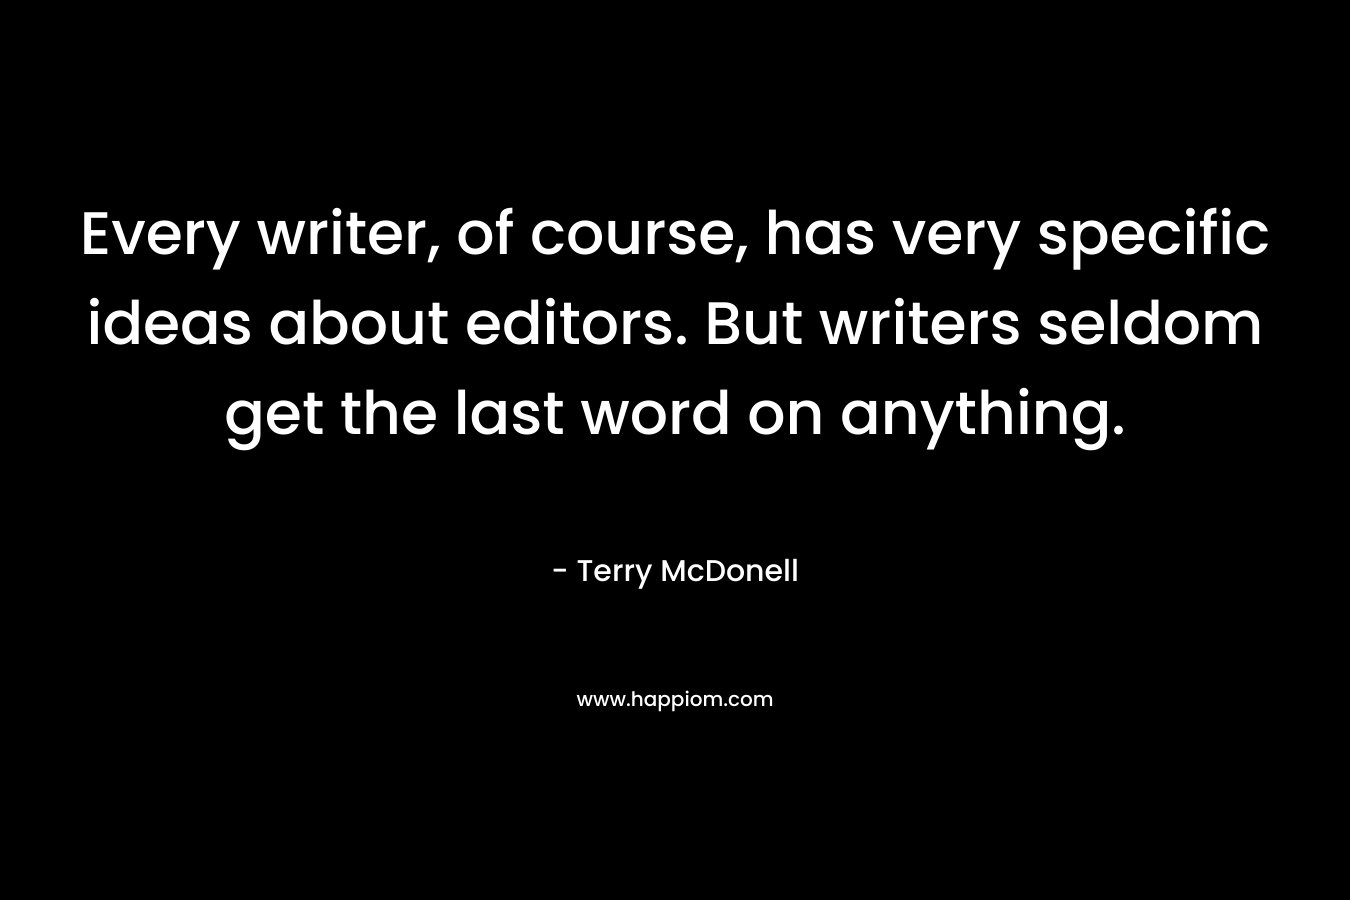 Every writer, of course, has very specific ideas about editors. But writers seldom get the last word on anything. – Terry McDonell